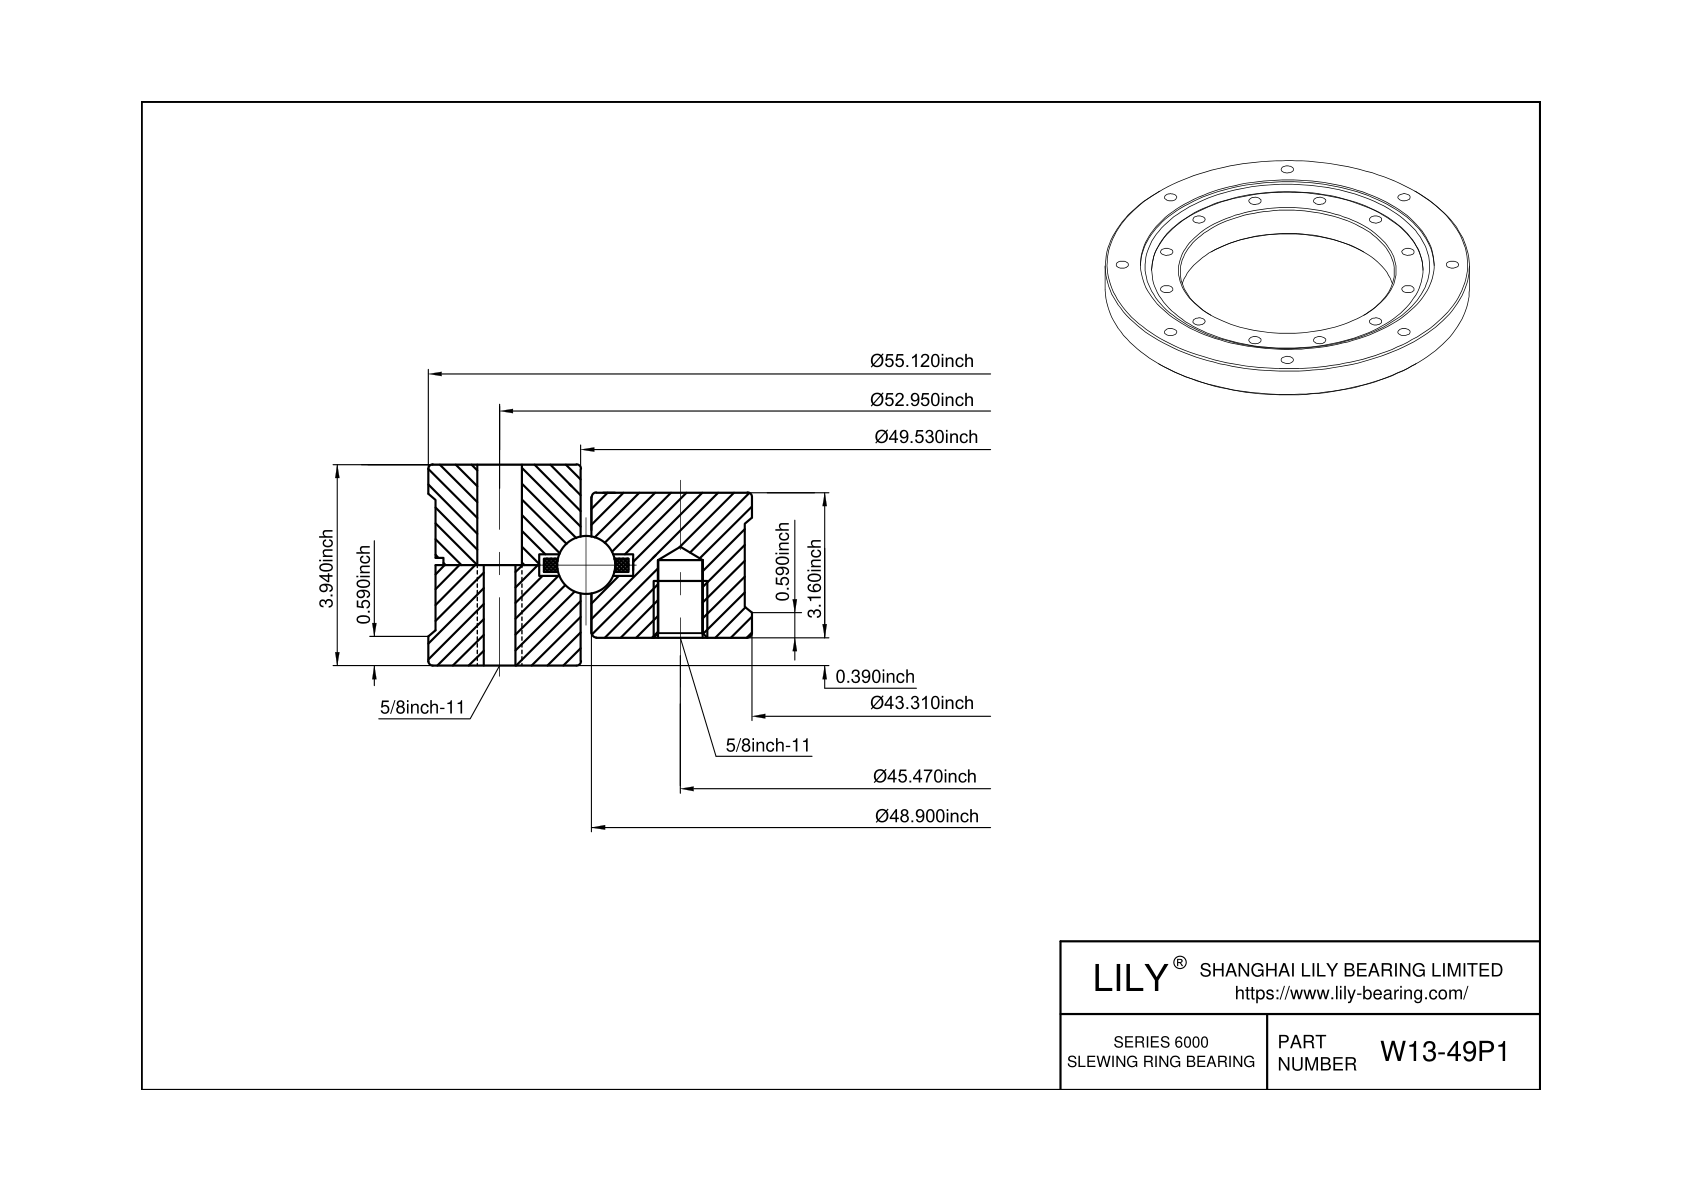 W13-49P1 6000 Series cad drawing